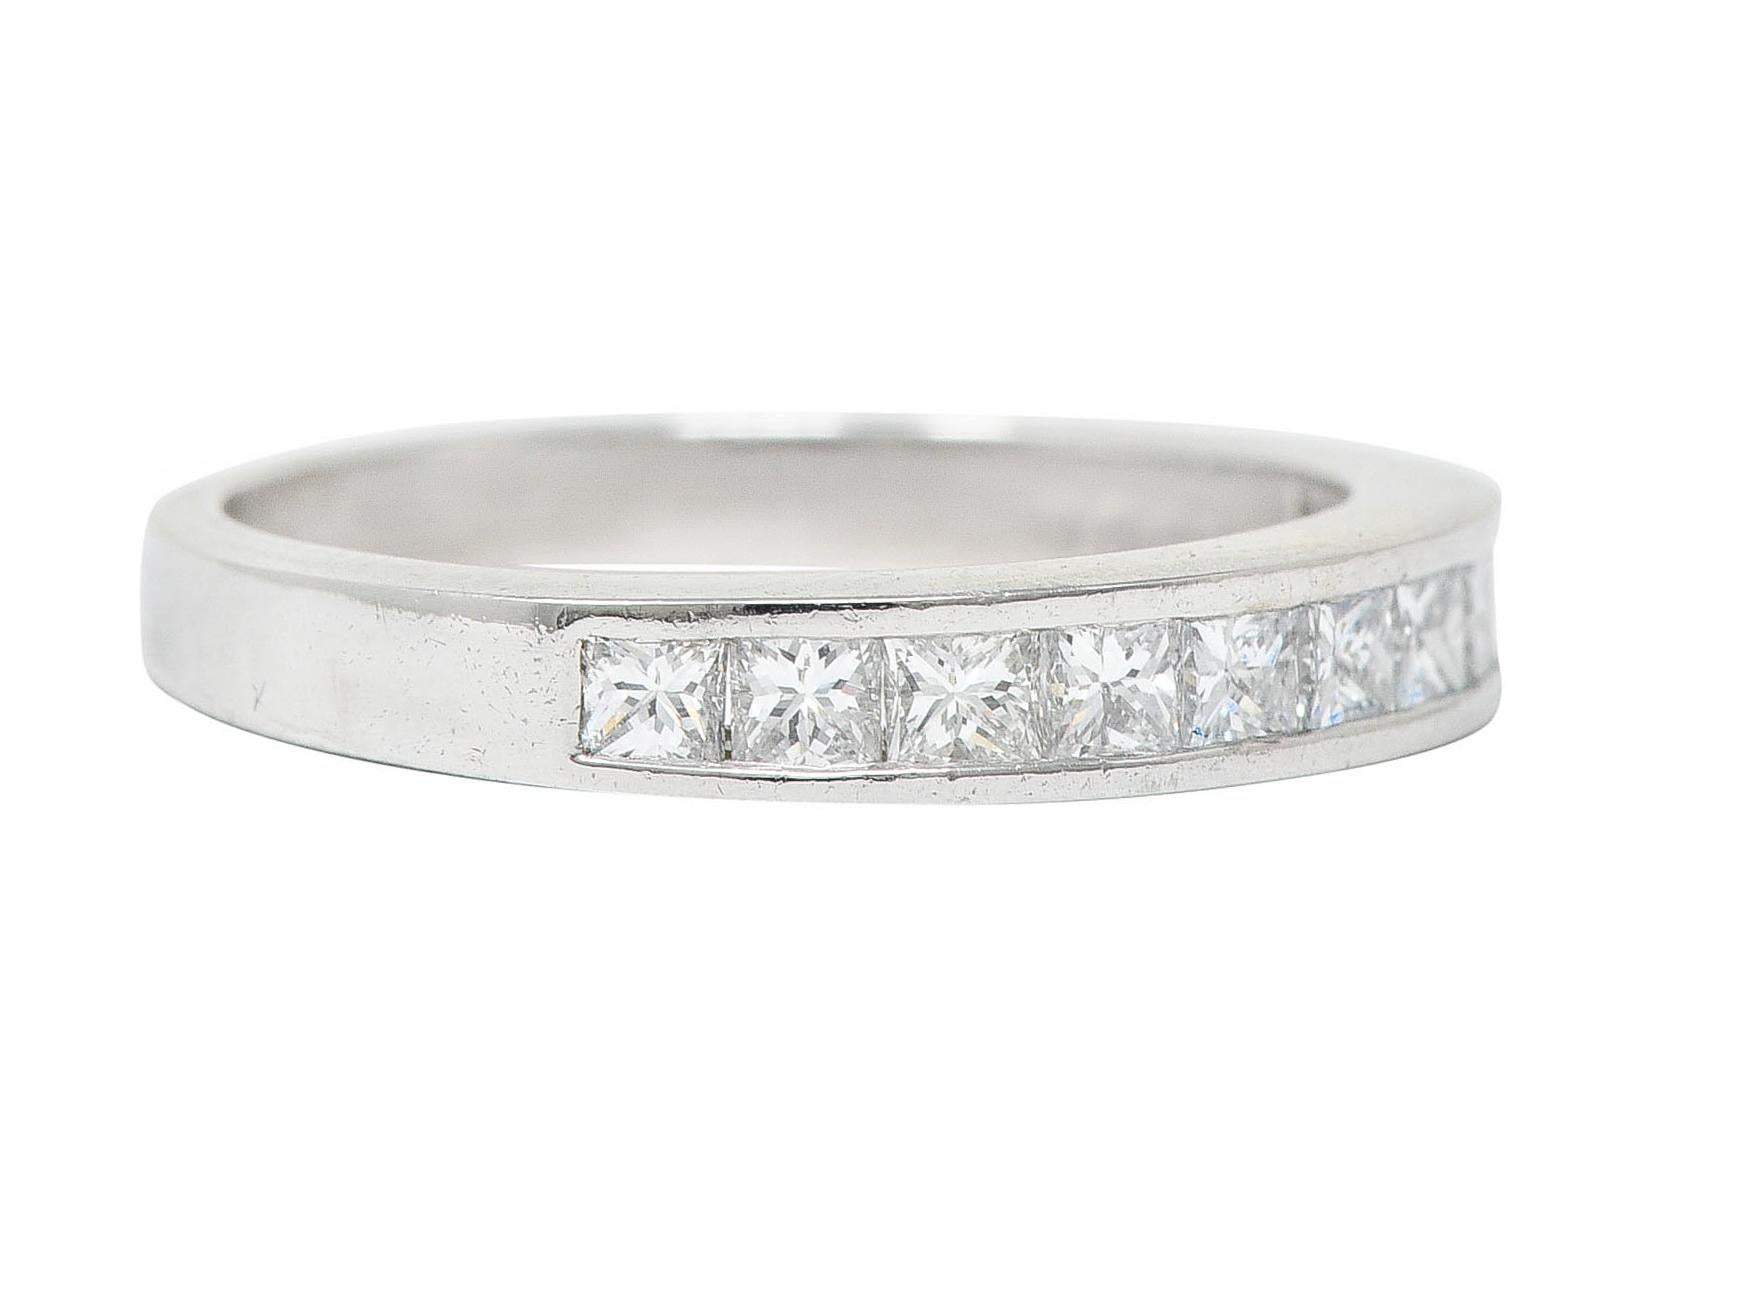 Band ring is channel set to front by graduating princess cut diamonds

Weighing approximately 0.55 carat in total - G/H in color with VS clarity

Numbered and stamped PT950 for platinum

Circa: 2000's

Ring size: 5 and sizable

Measures: North to